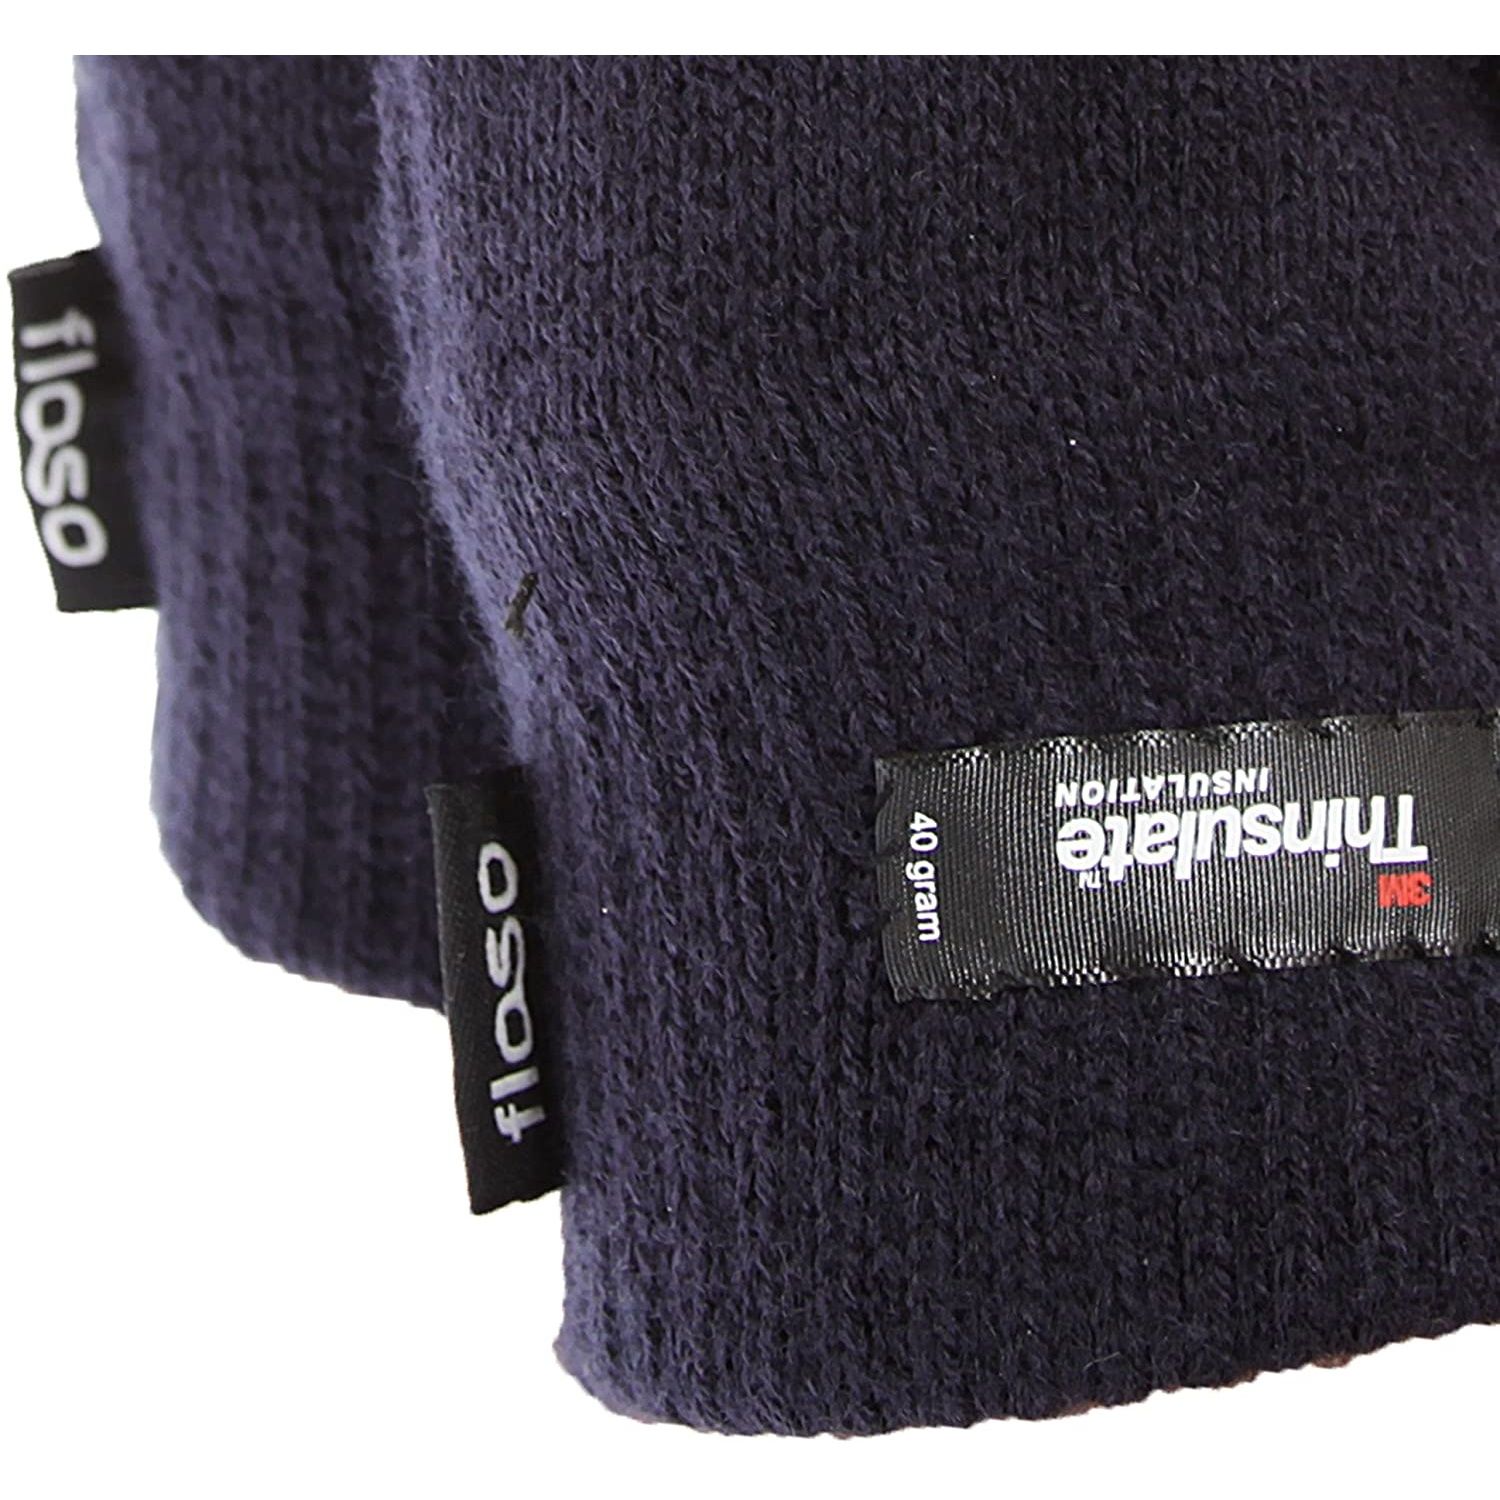 Our mens Thinsulate gloves are of the finest quality. The Thinsulate lining in the gloves provides warmth and additional comfort. Thinsulate gloves provide thermal warmth, are light in weight and comfortable so you can wear them throughout the day. Fibre contents for outer 100% acrylic  and inner 65% Polypropylene, 35% Polyester.